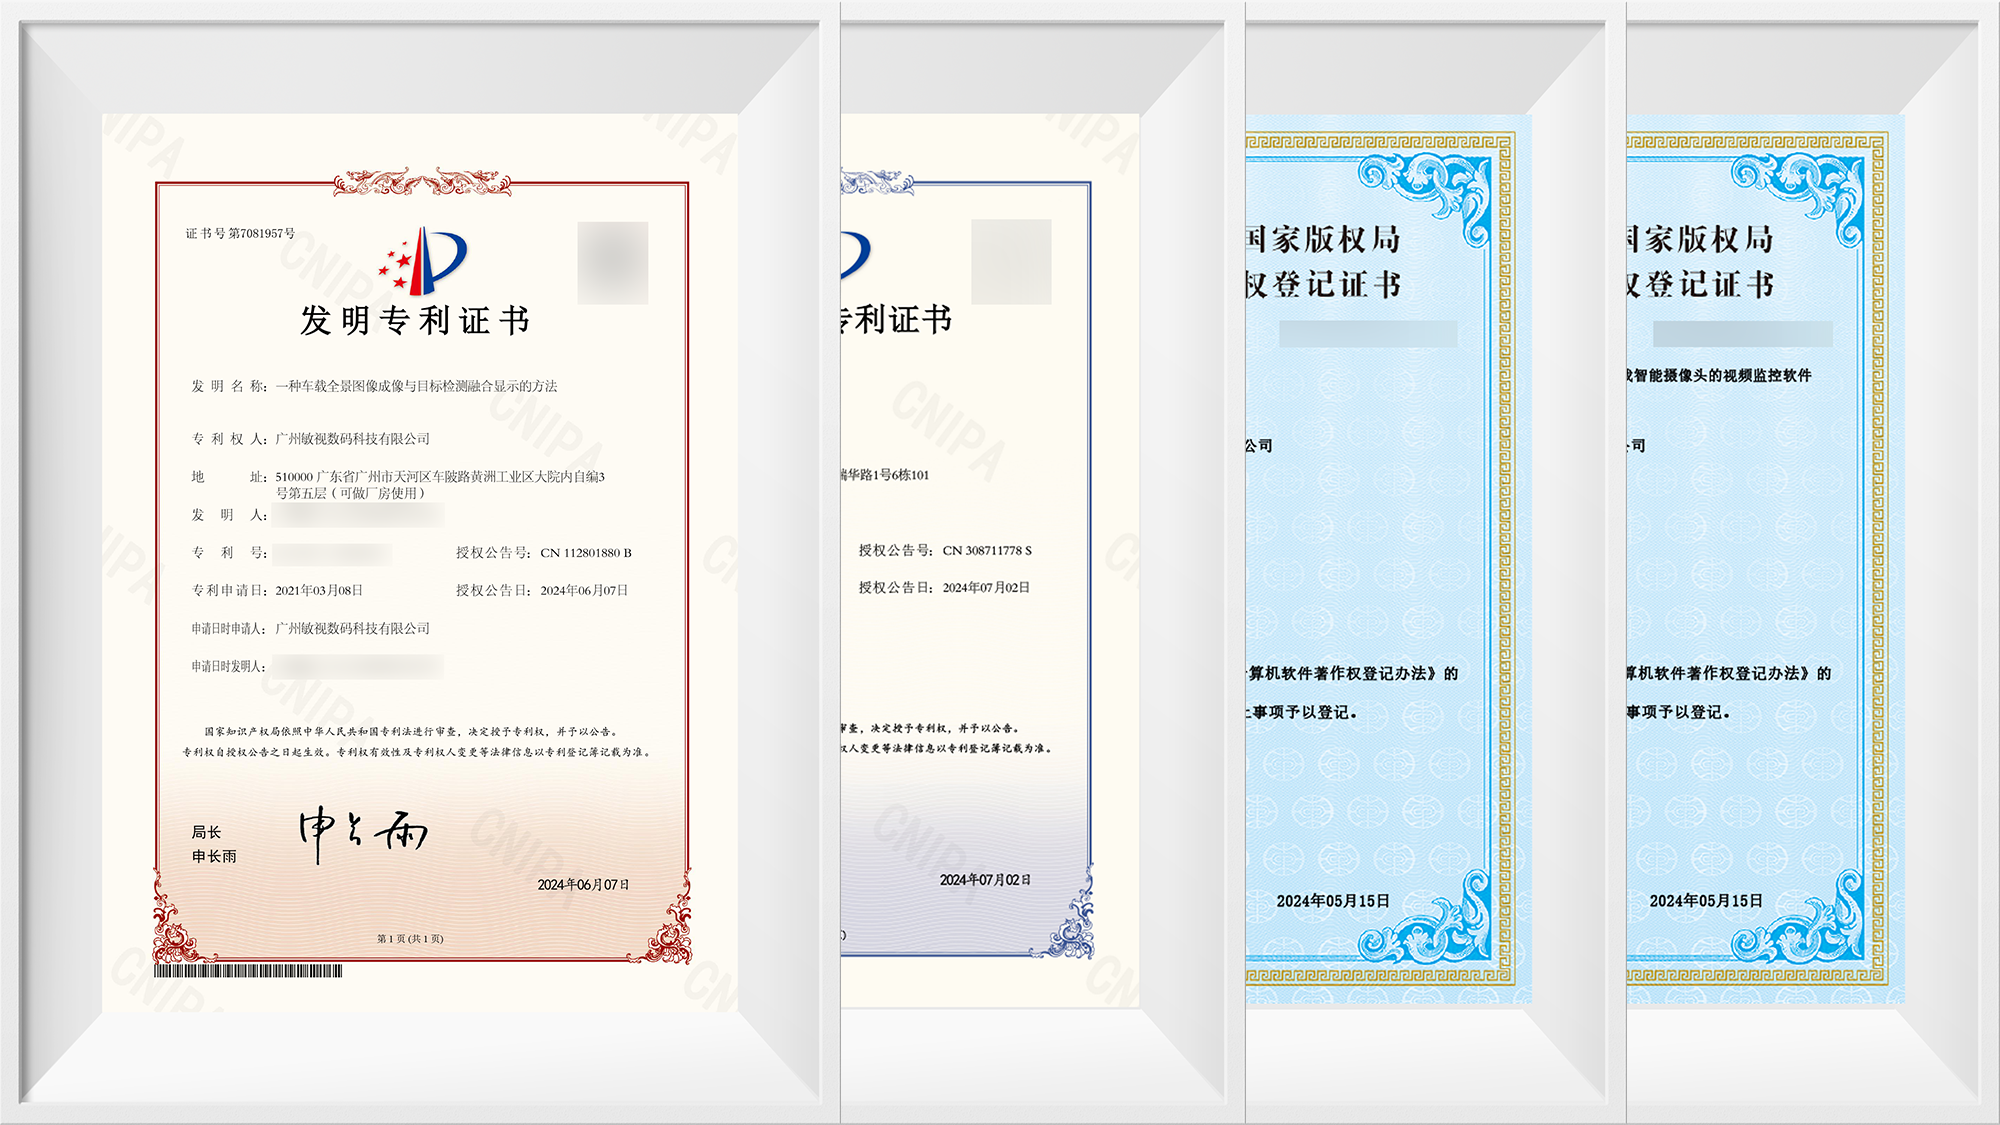 Congratulations！STONKAM has added new invention patents and other certificates